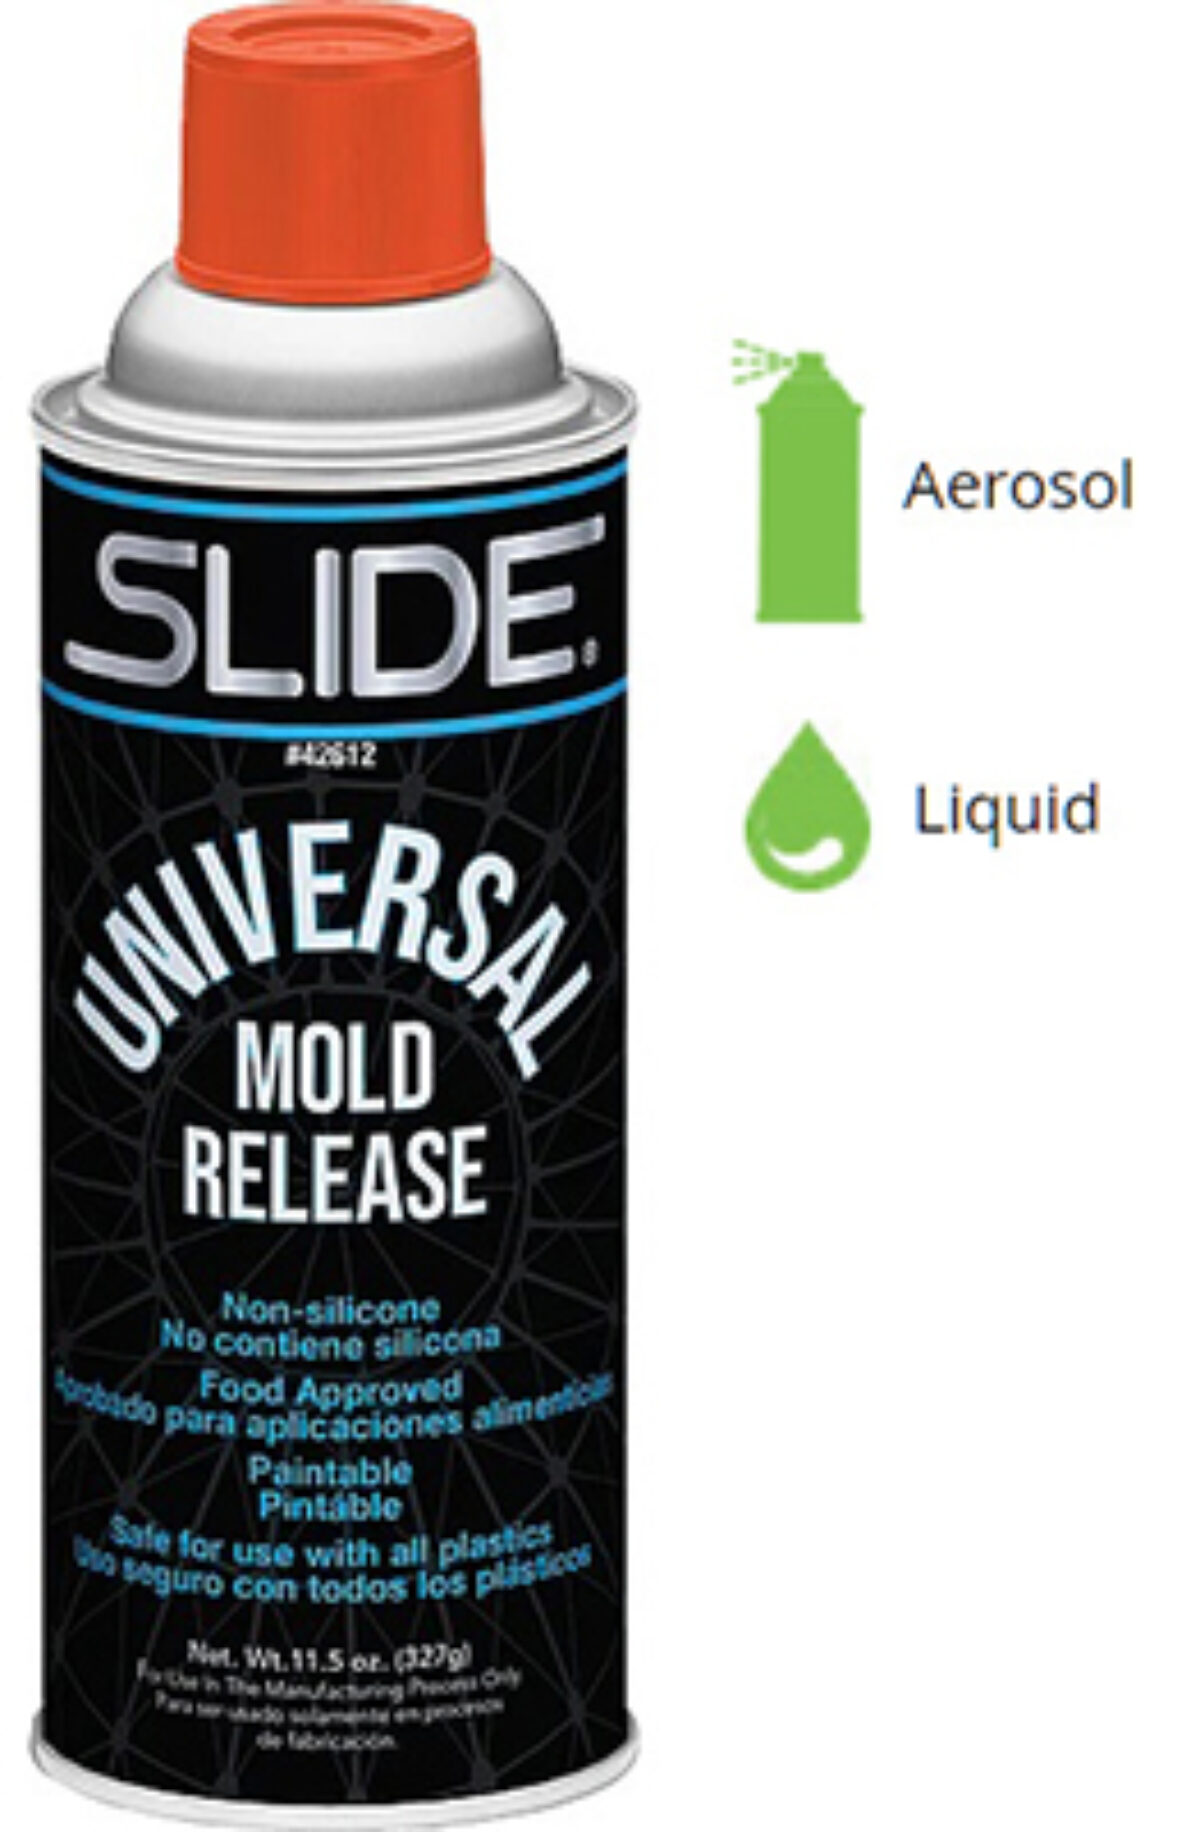 Universal Mold Release No. 42612